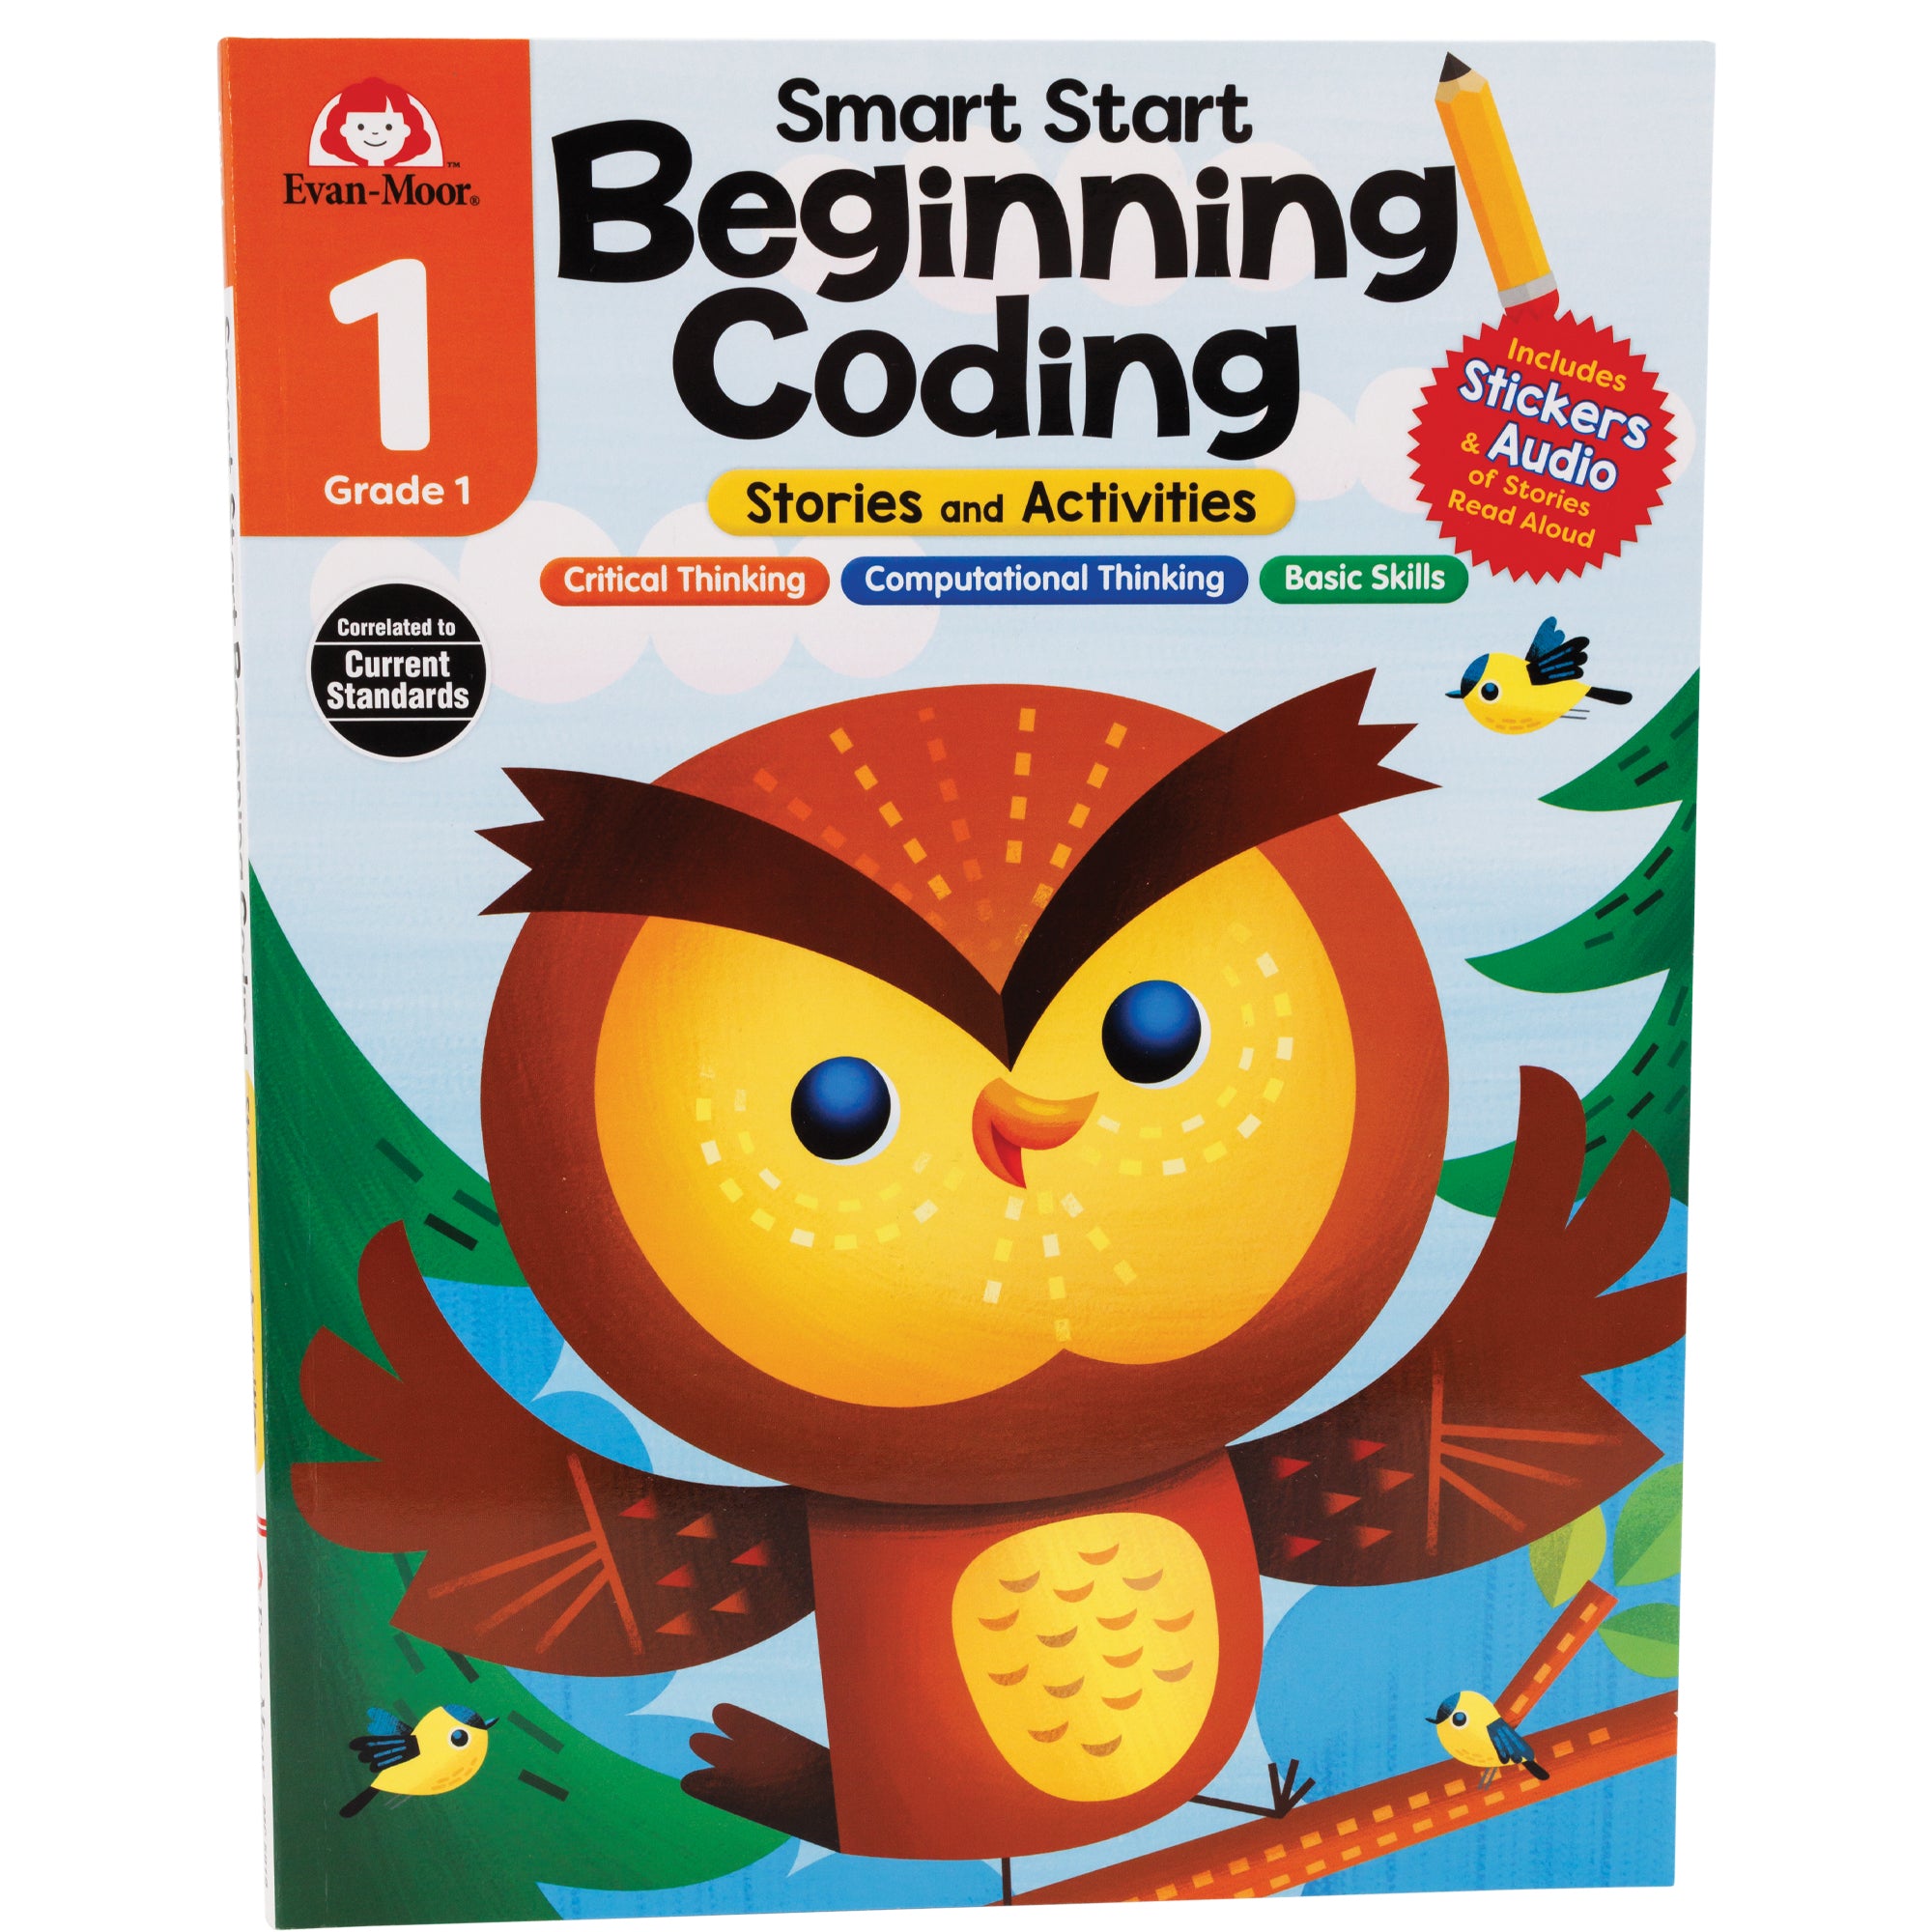 Smart Start Beginning Coding book. The title is at the top over a forest trees and blue sky background. A brown and yellow owl in the middle is perched on a branch surrounded by 3 small yellow, blue, and black birds.